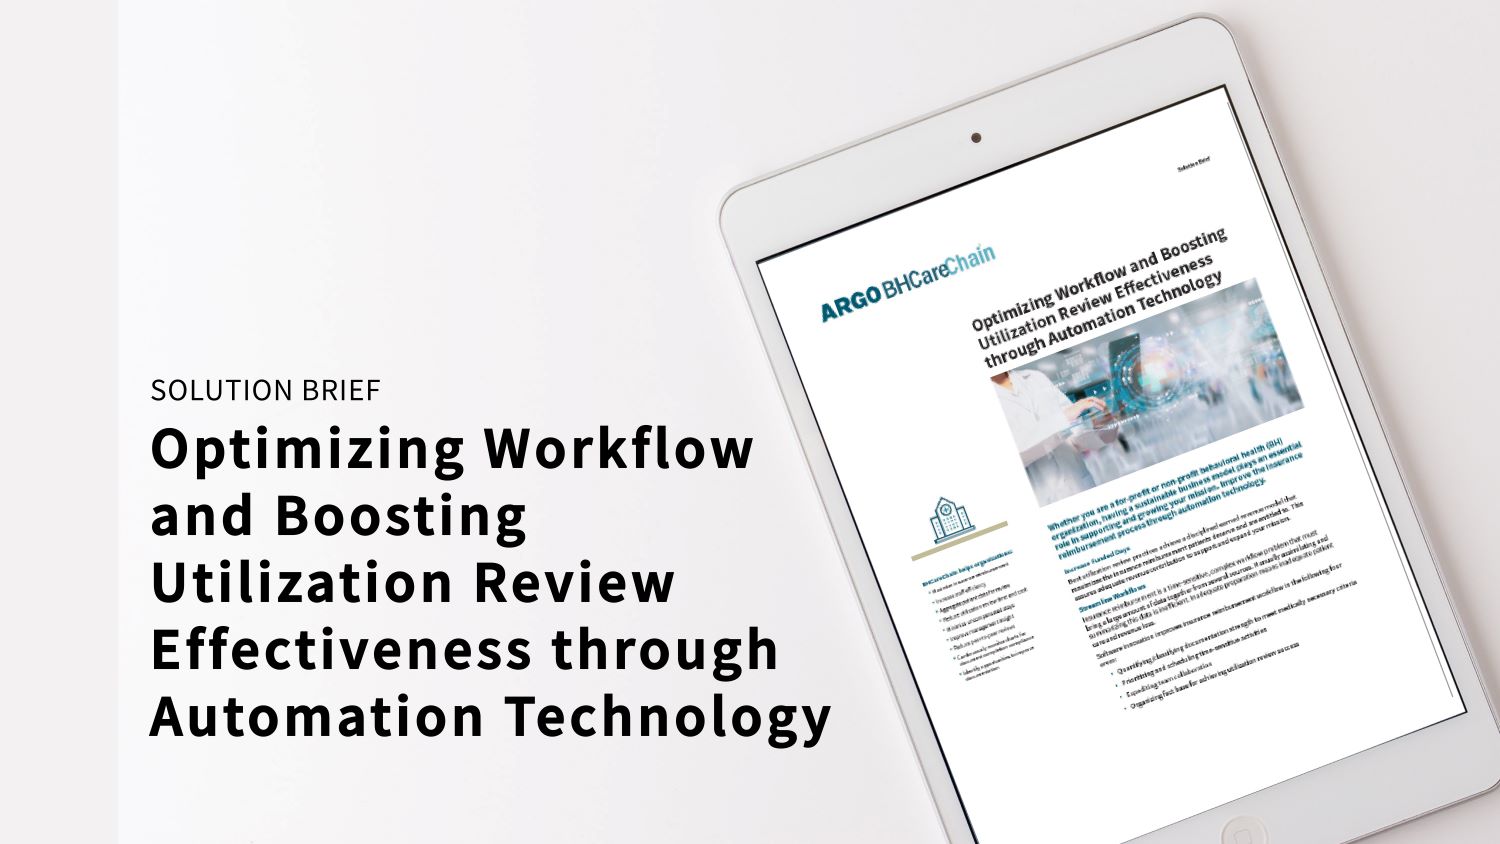 Solution Brief Optimizing Workflow And Boosting Utilization Review